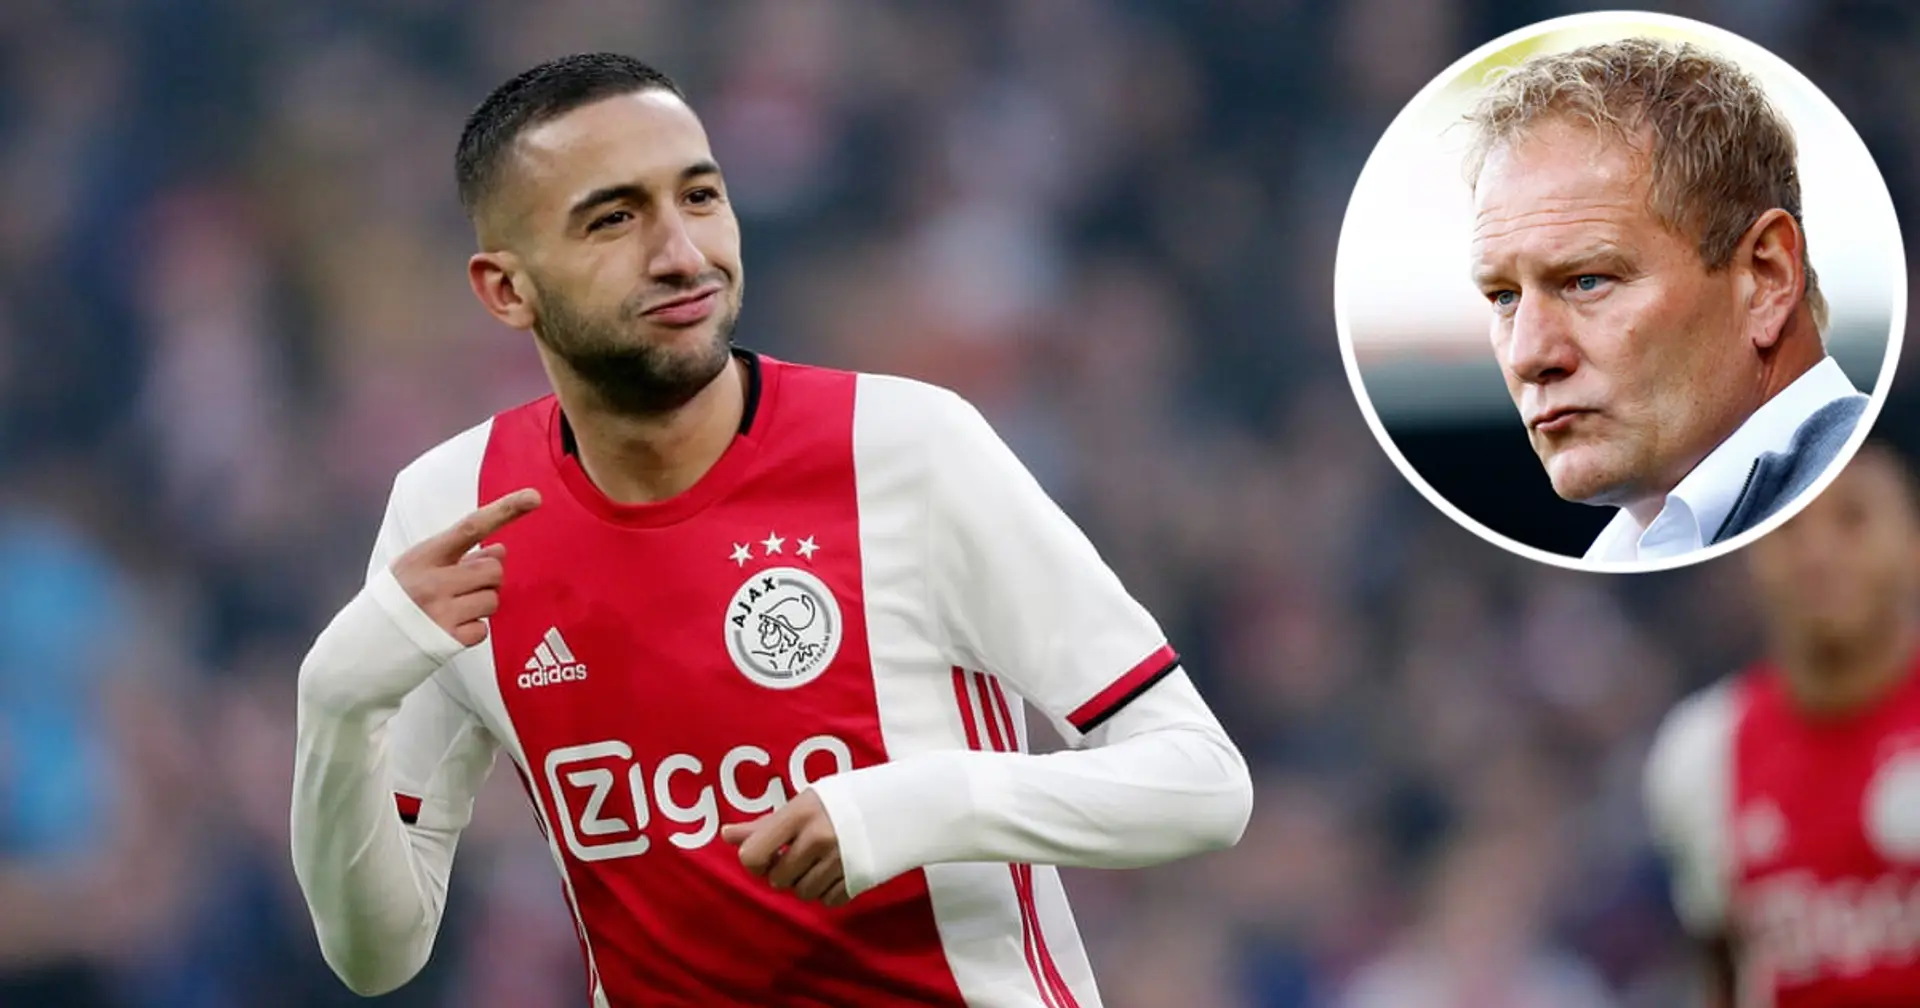 'He looked very fragile': Hakim Ziyech's youth coach remembers his first impression of Moroccan